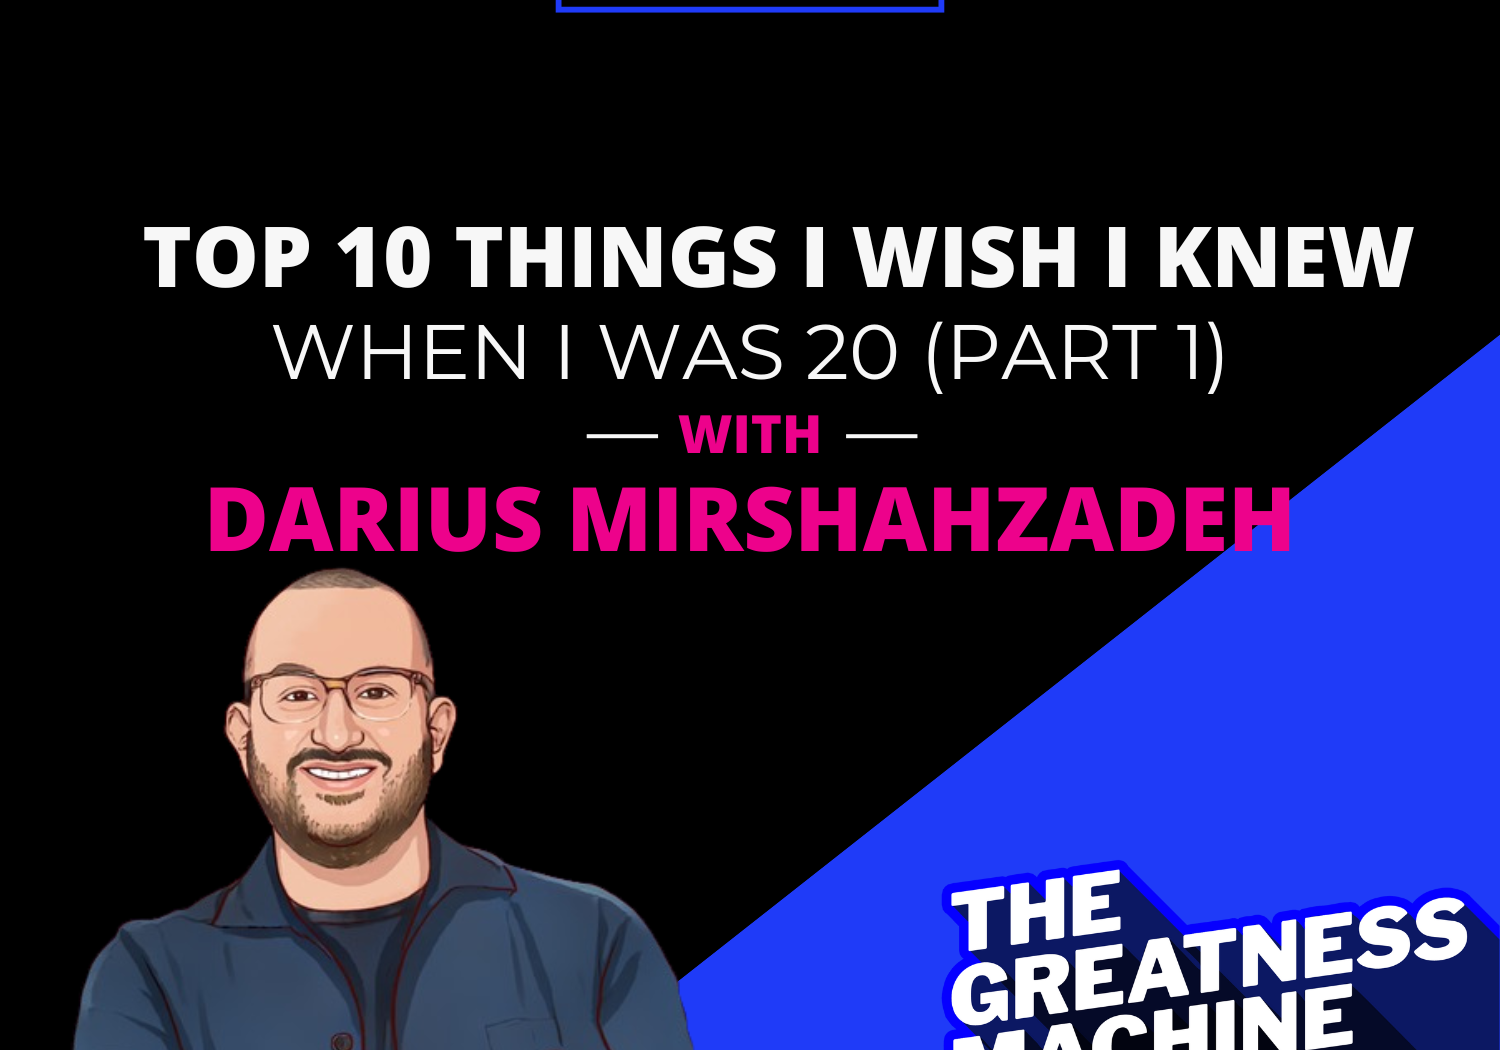 Greatness Machine Thumbnail (Top 10 Things I Wish I Knew When I Was 20 Part 1)